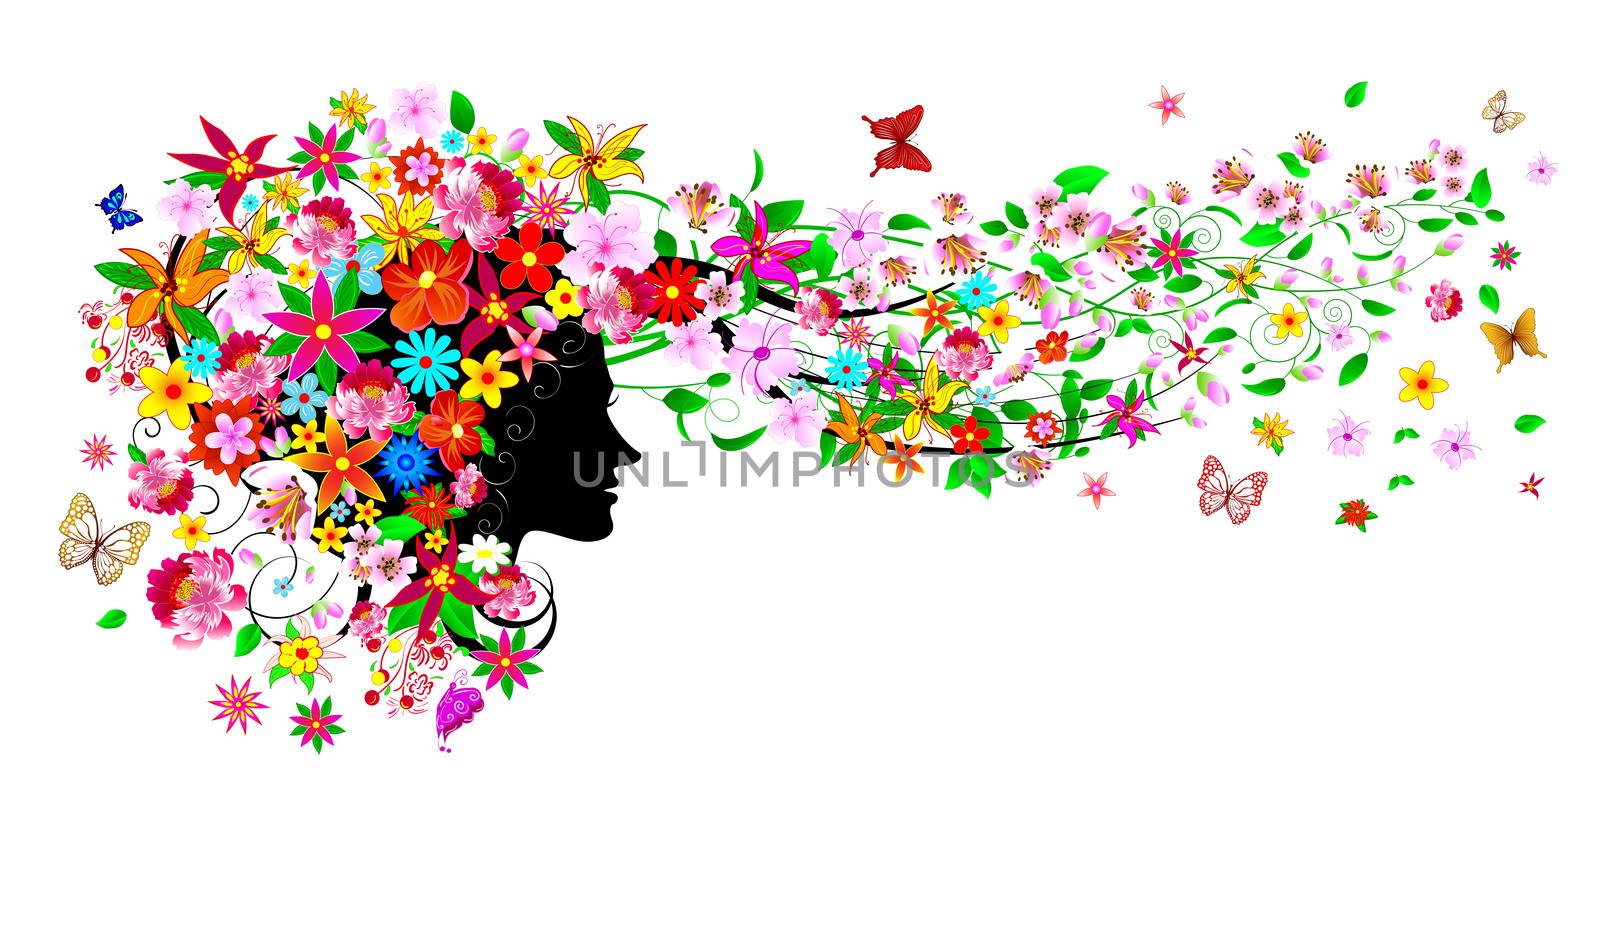 Silhouette of a woman's face among flowers and butterflies. Girl with flowers and butterflies.A girl with flowers and butterflies on her head and in her hair.                                                                                                                                                                                                                                                                                                                                                                            